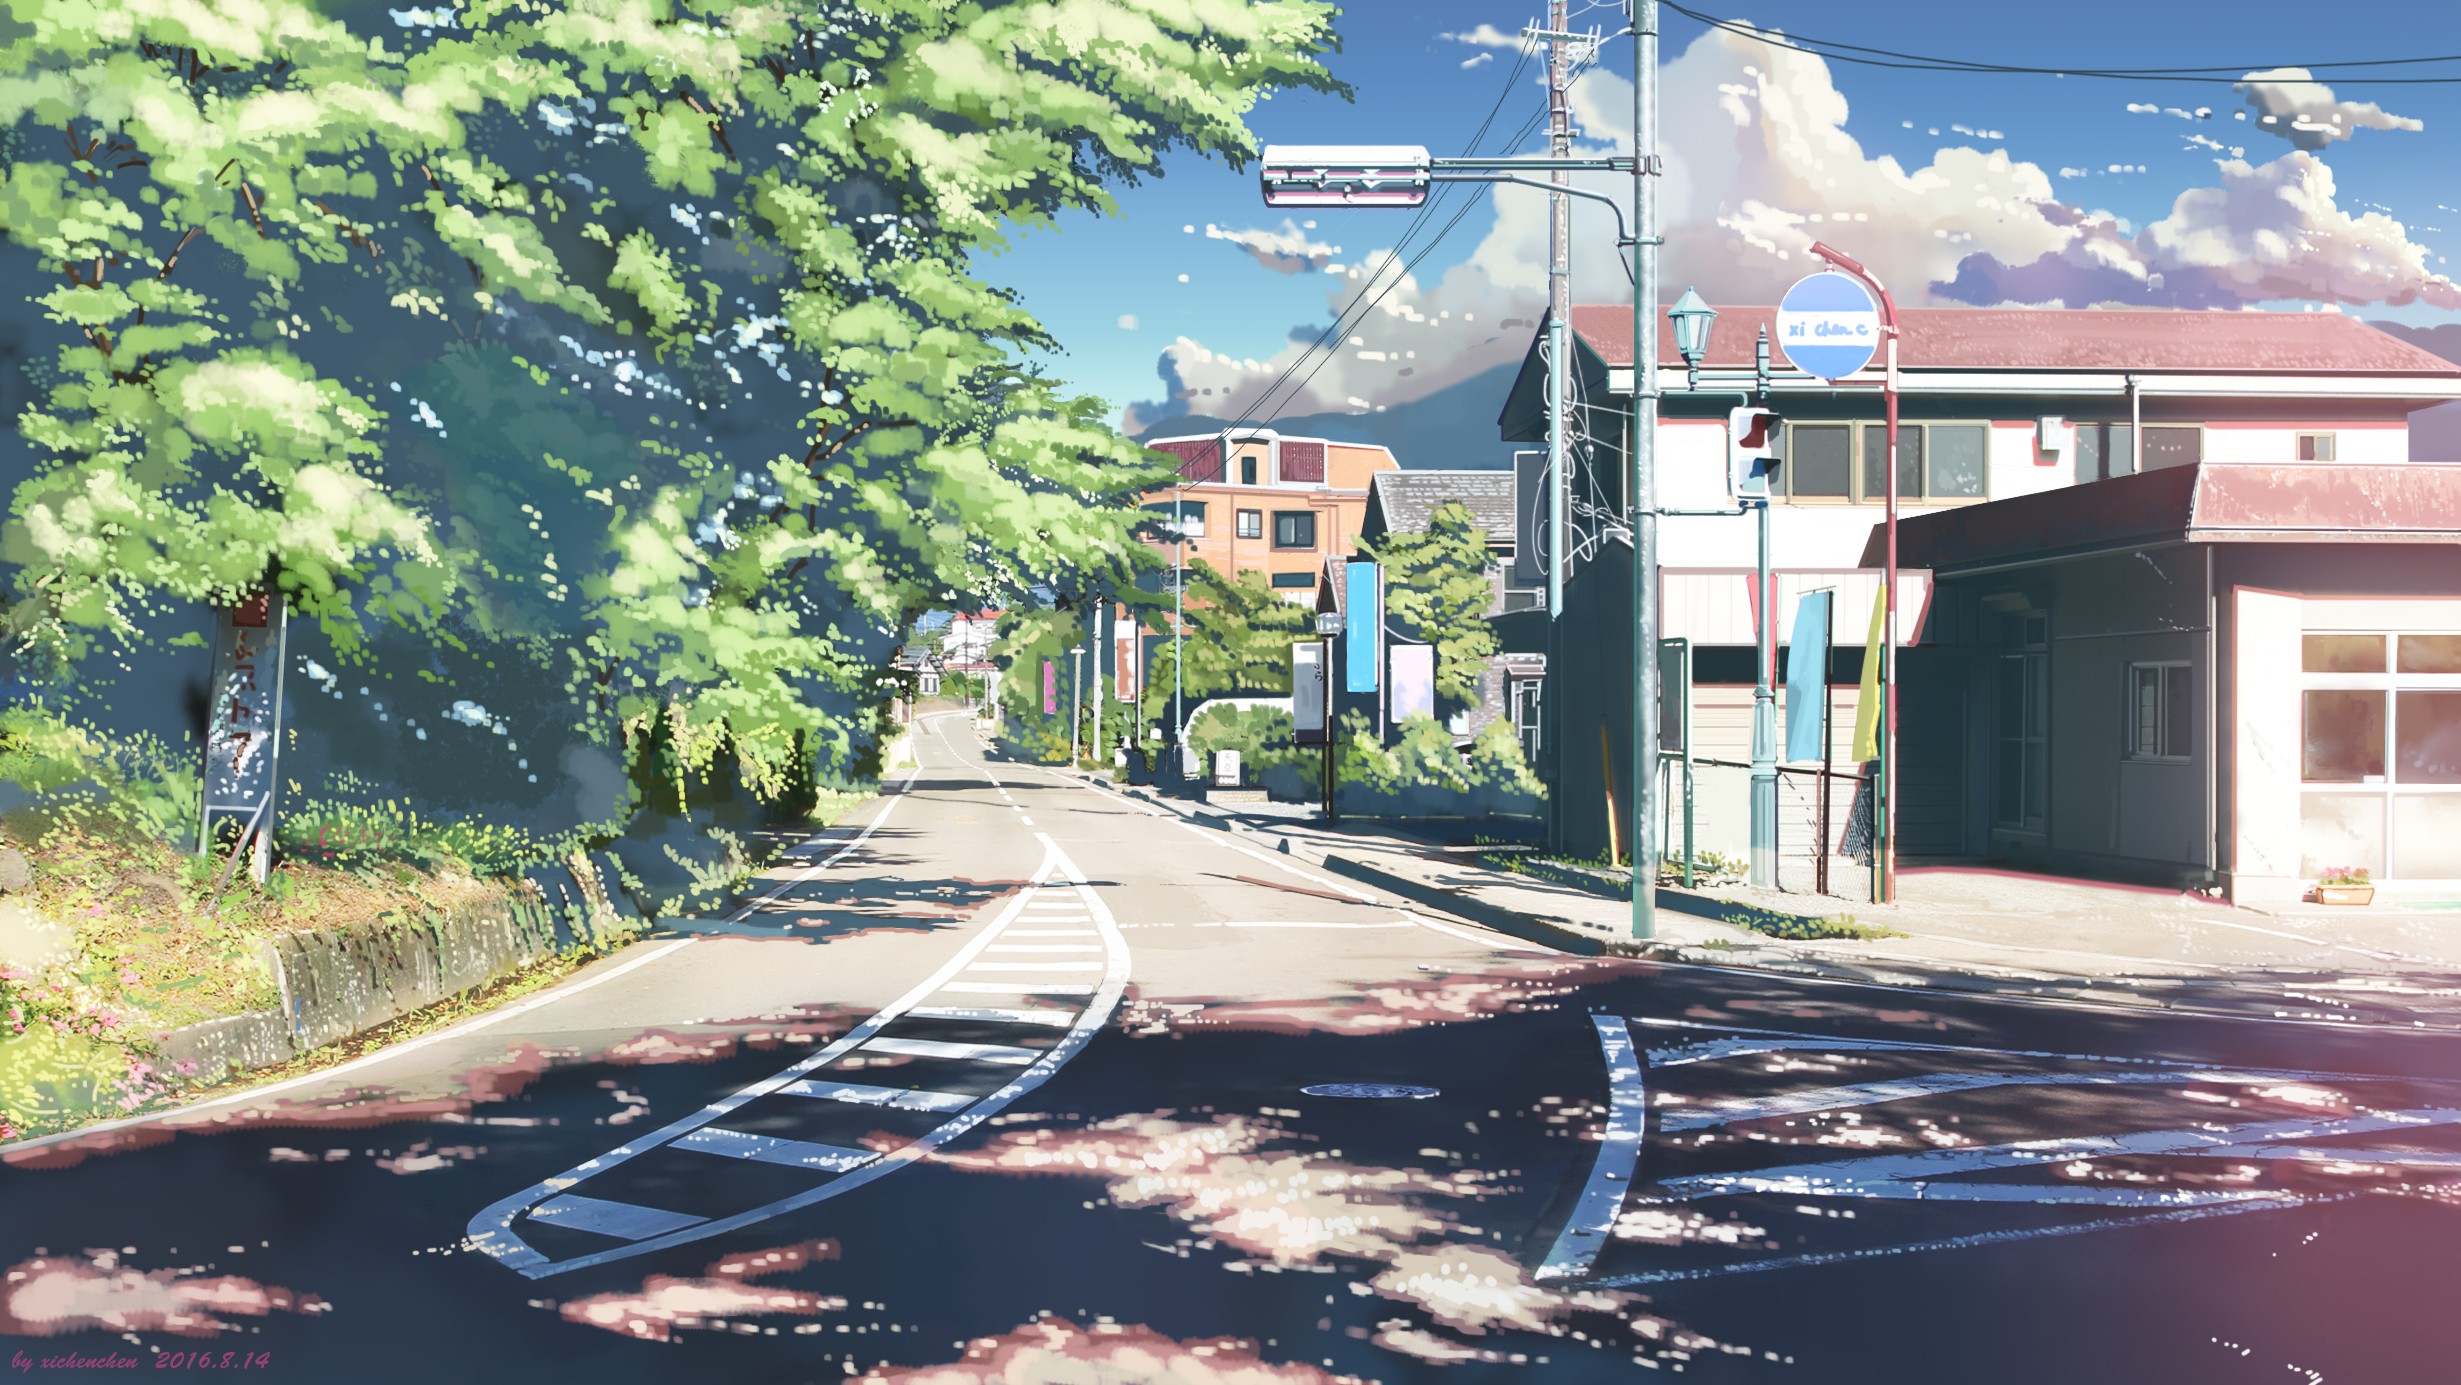 Anime 2461x1385 building clouds sunglasses trees watermarked anime street urban